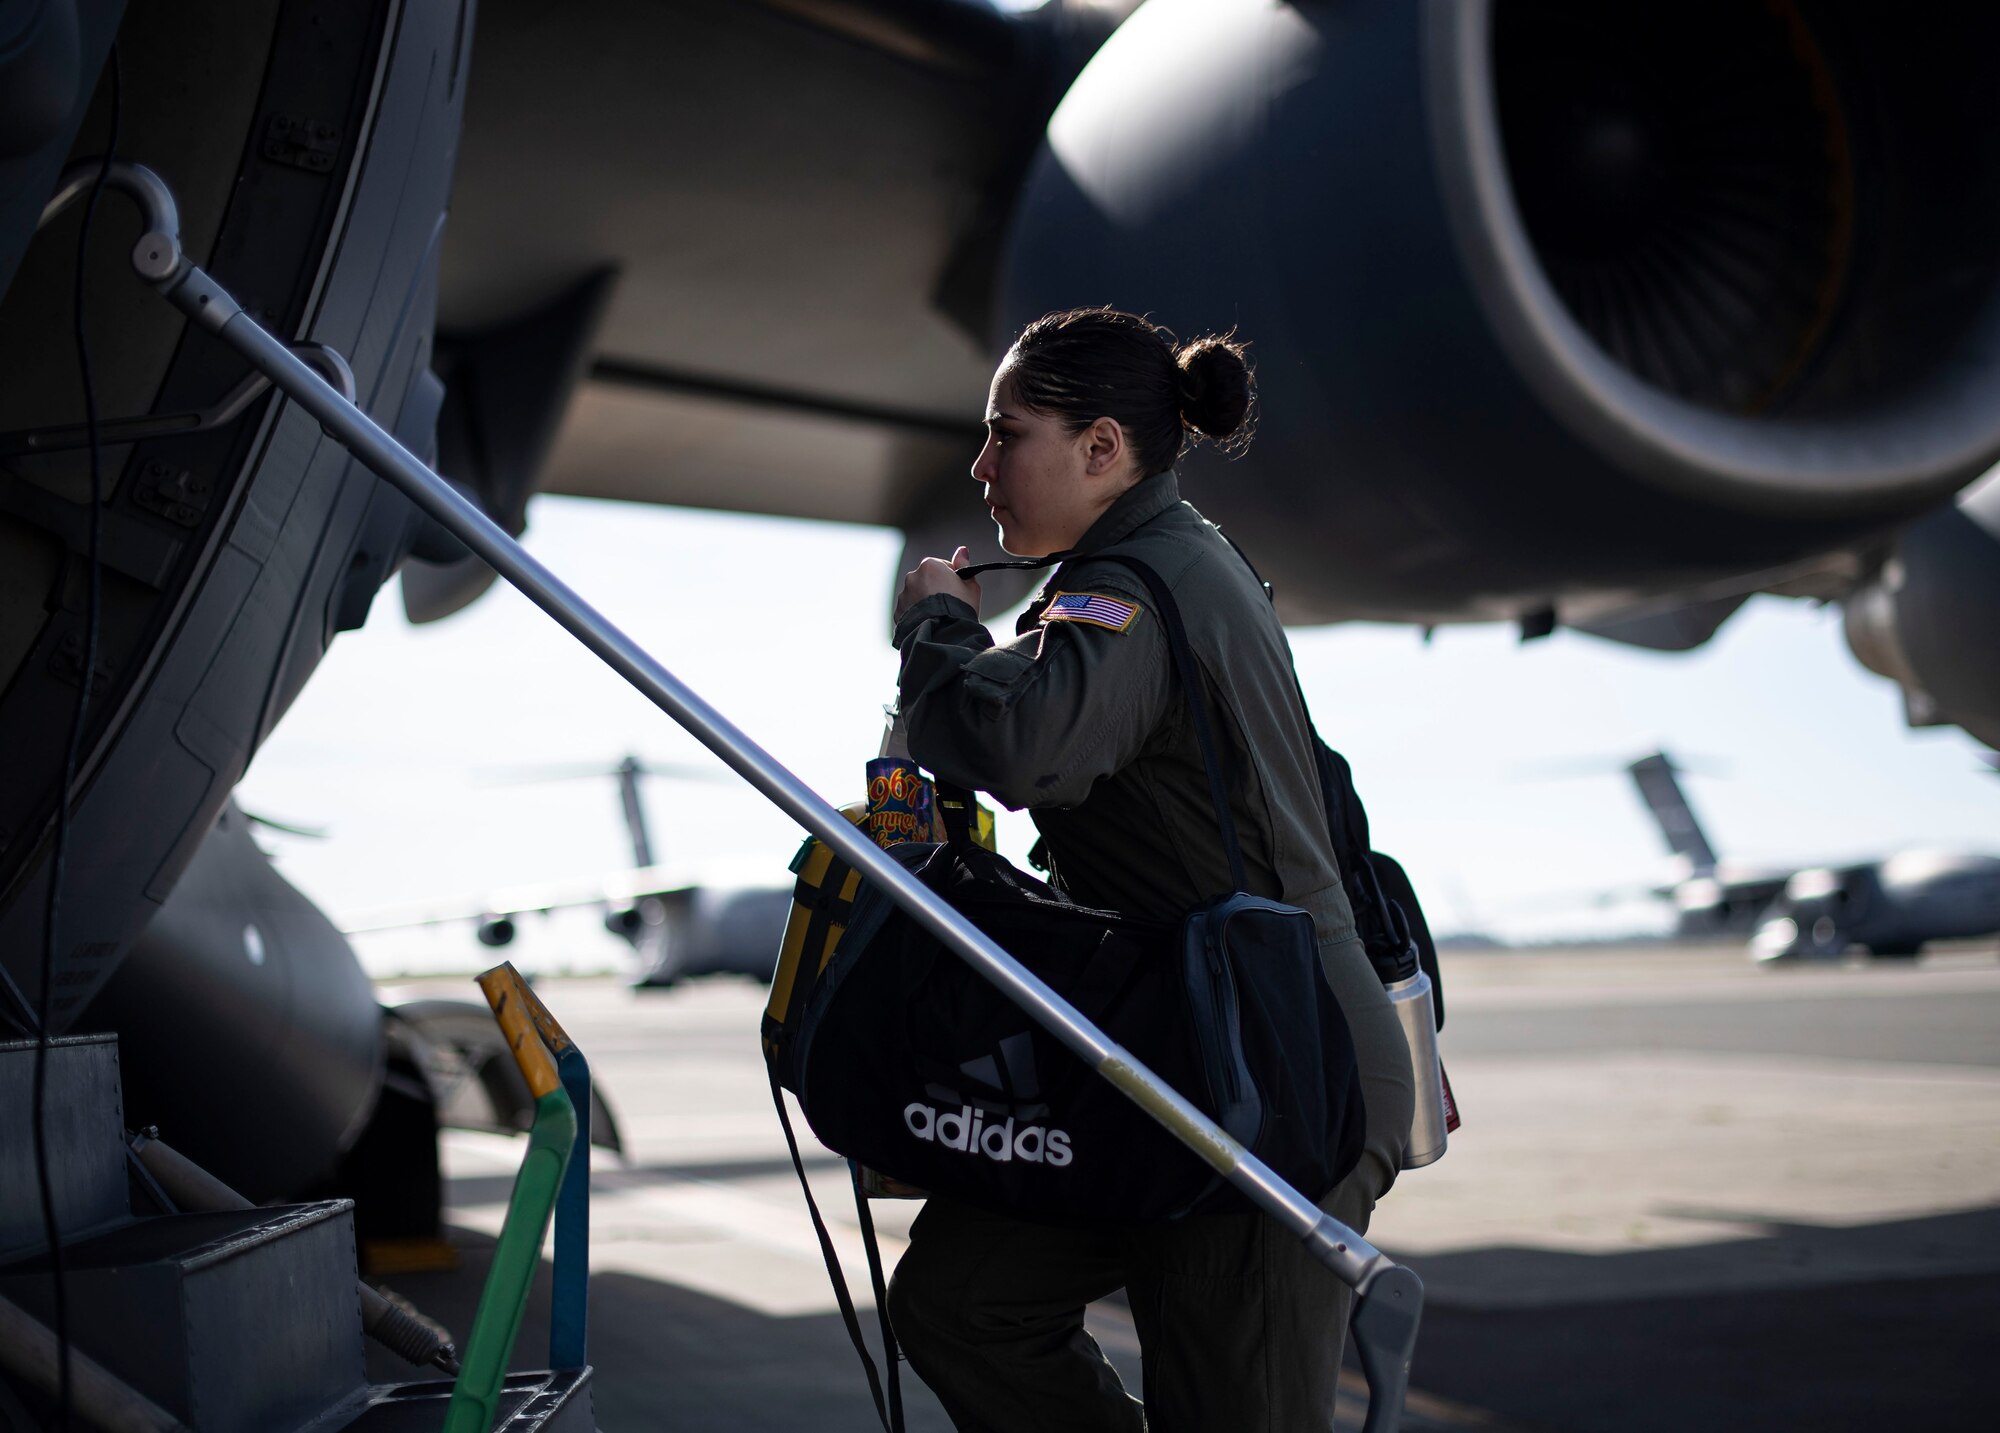 U.S. Air Force Staff Sgt. Maranda Trujillo, 21st Airlift Squadron instructor loadmaster, boards a C-17 Globemaster III April 27, 2020, at Travis Air Force Base, California. Trujillo was among the 21st AS aircrew tasked with transporting four Transport Isolation System capsules from Joint Base Charleston, South Carolina, to Travis AFB. TIS capsules, which were initially engineered in response to the Ebola virus in 2014, allow the transport of individuals with highly contagious diseases without infecting any other passengers or aircrew on the aircraft. (U.S. Air Force photo by Senior Airman Christian Conrad)